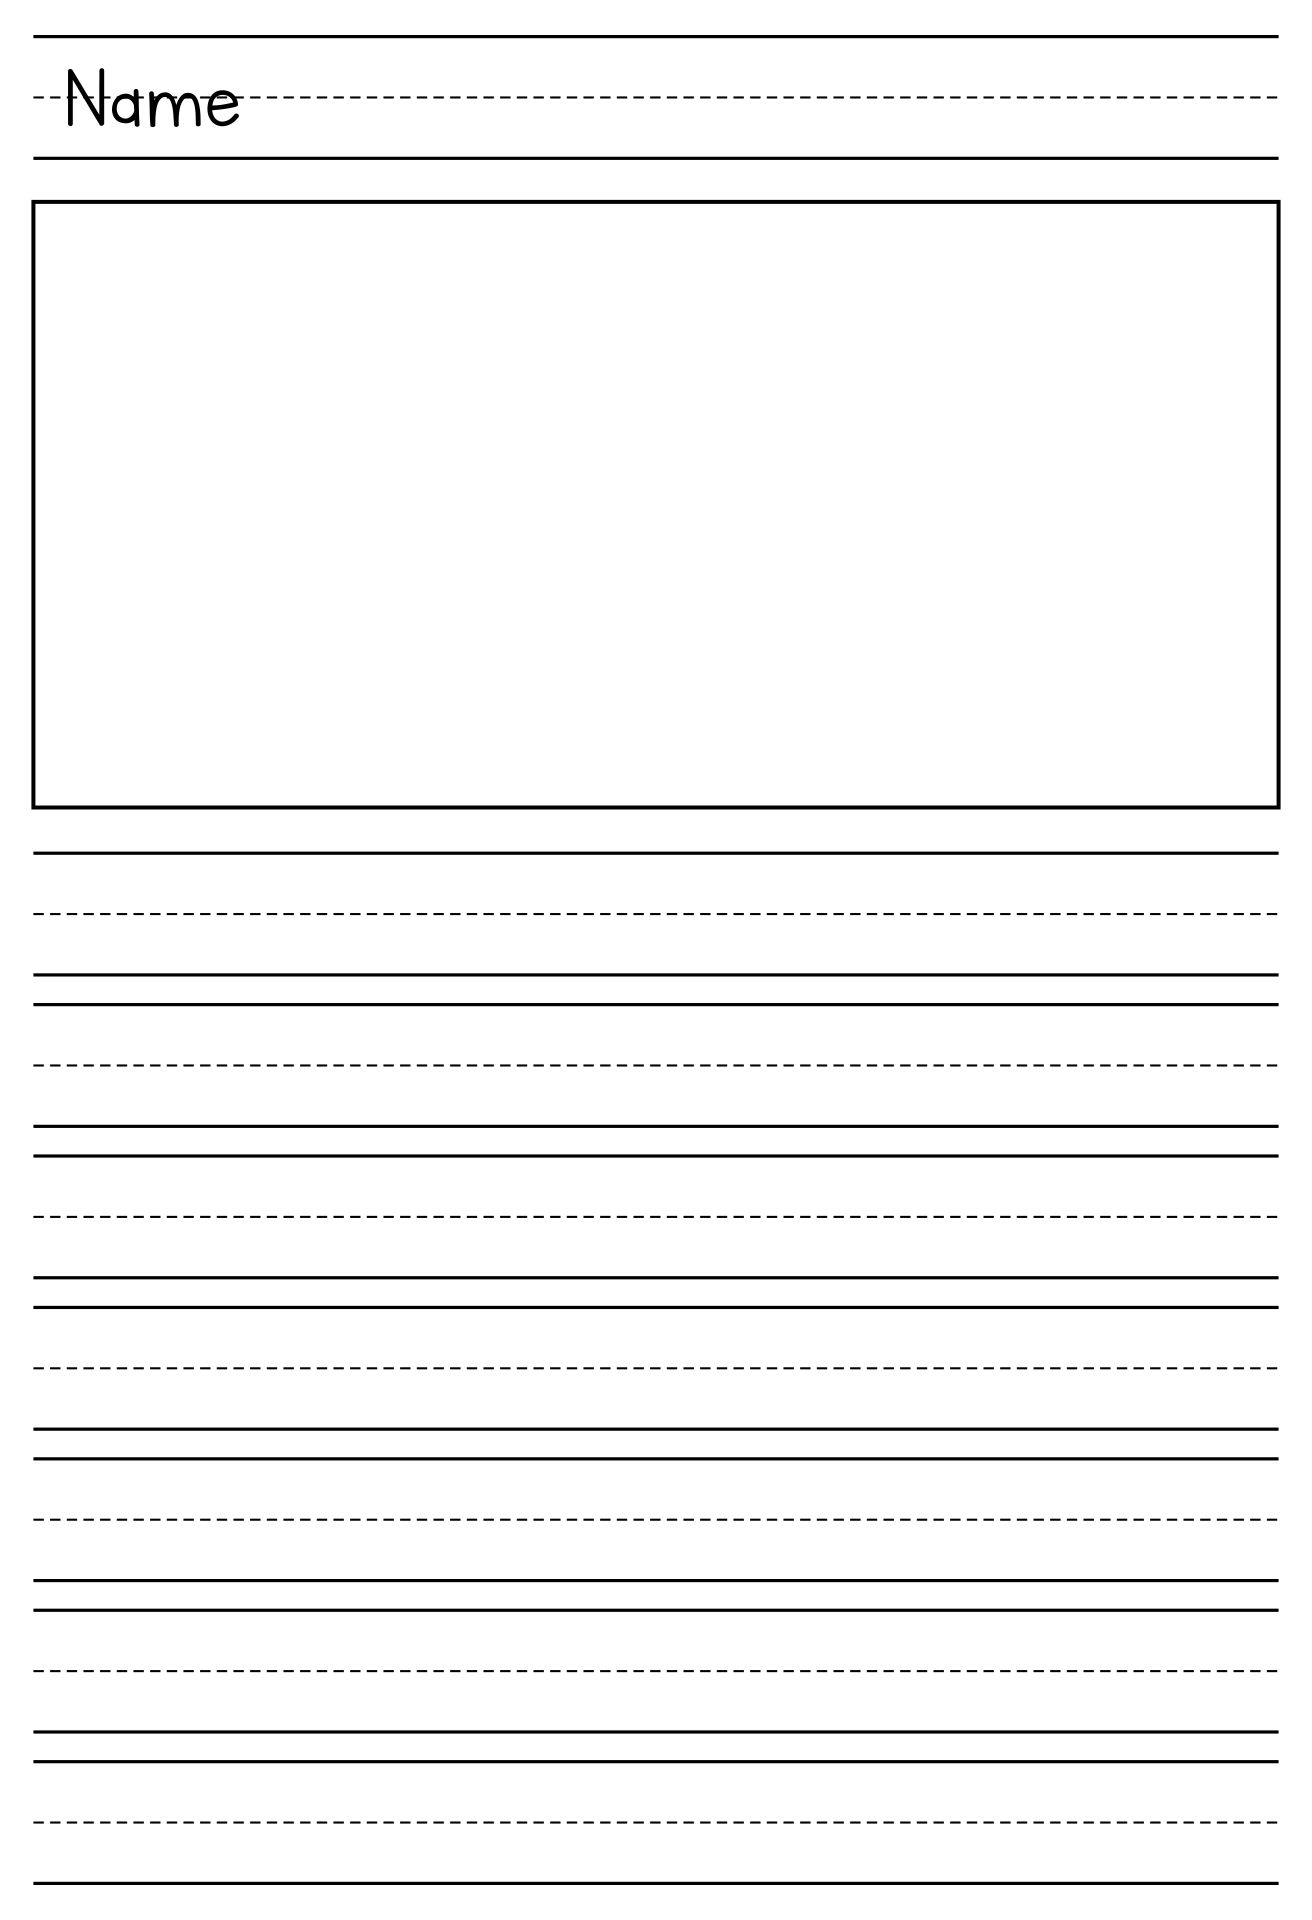 Primary Writing Paper Template